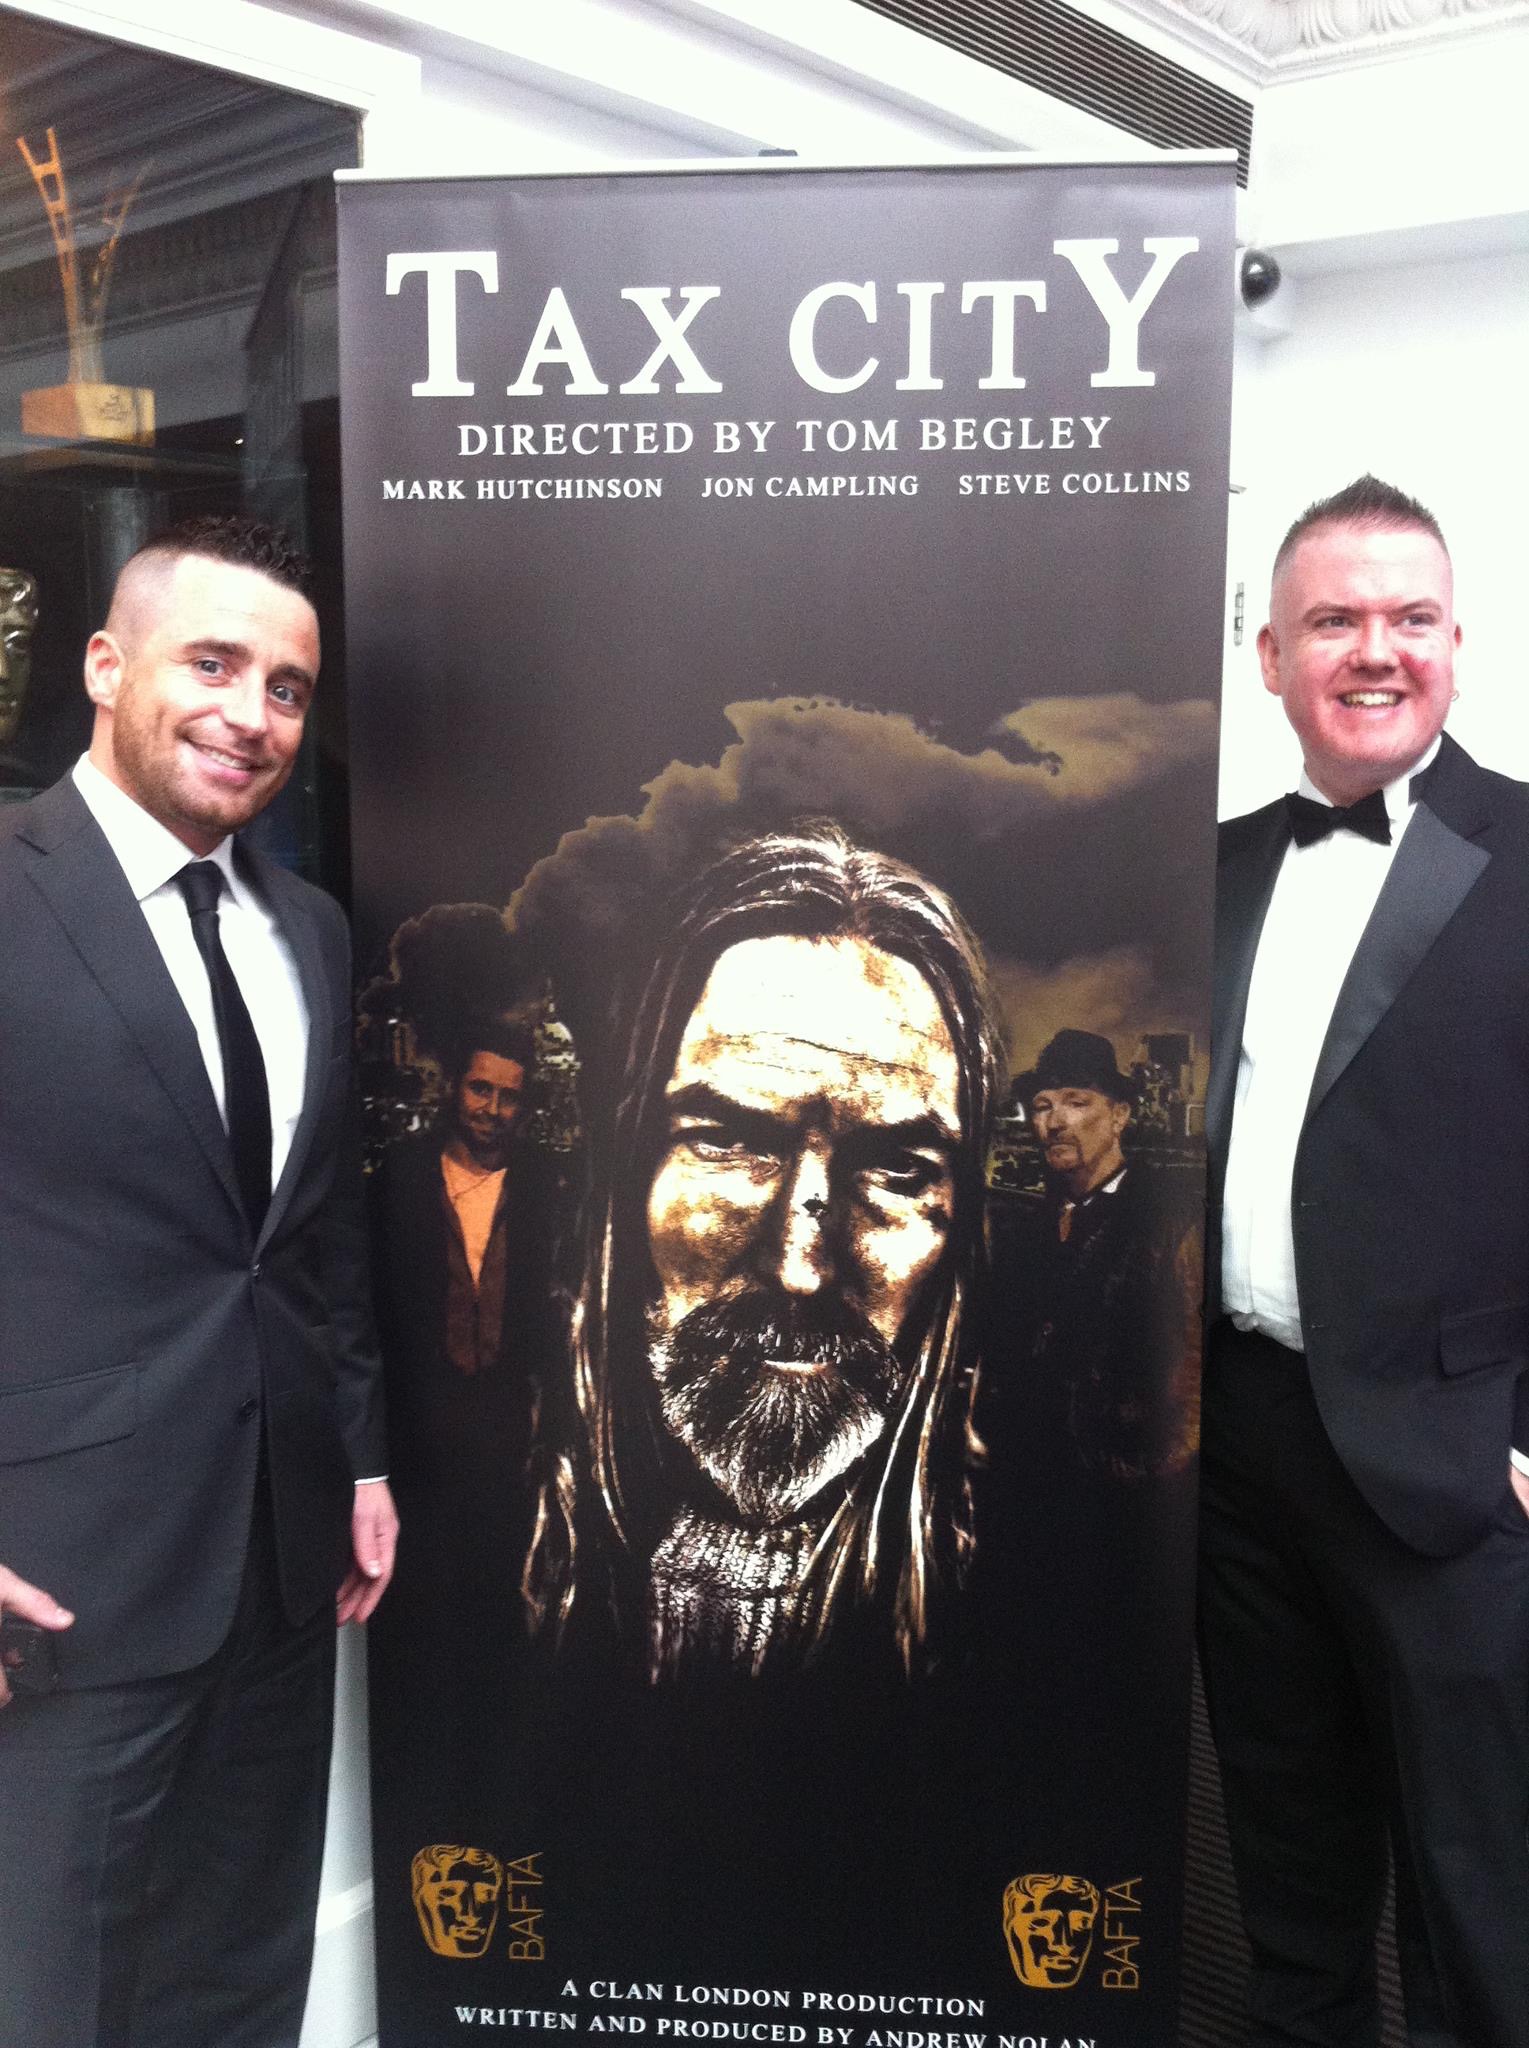 Tax City star Mark Hutchinson (left) with the short film's writer/producer Andy Nolan at its sold out premiere screening at BAFTA, London - 2013